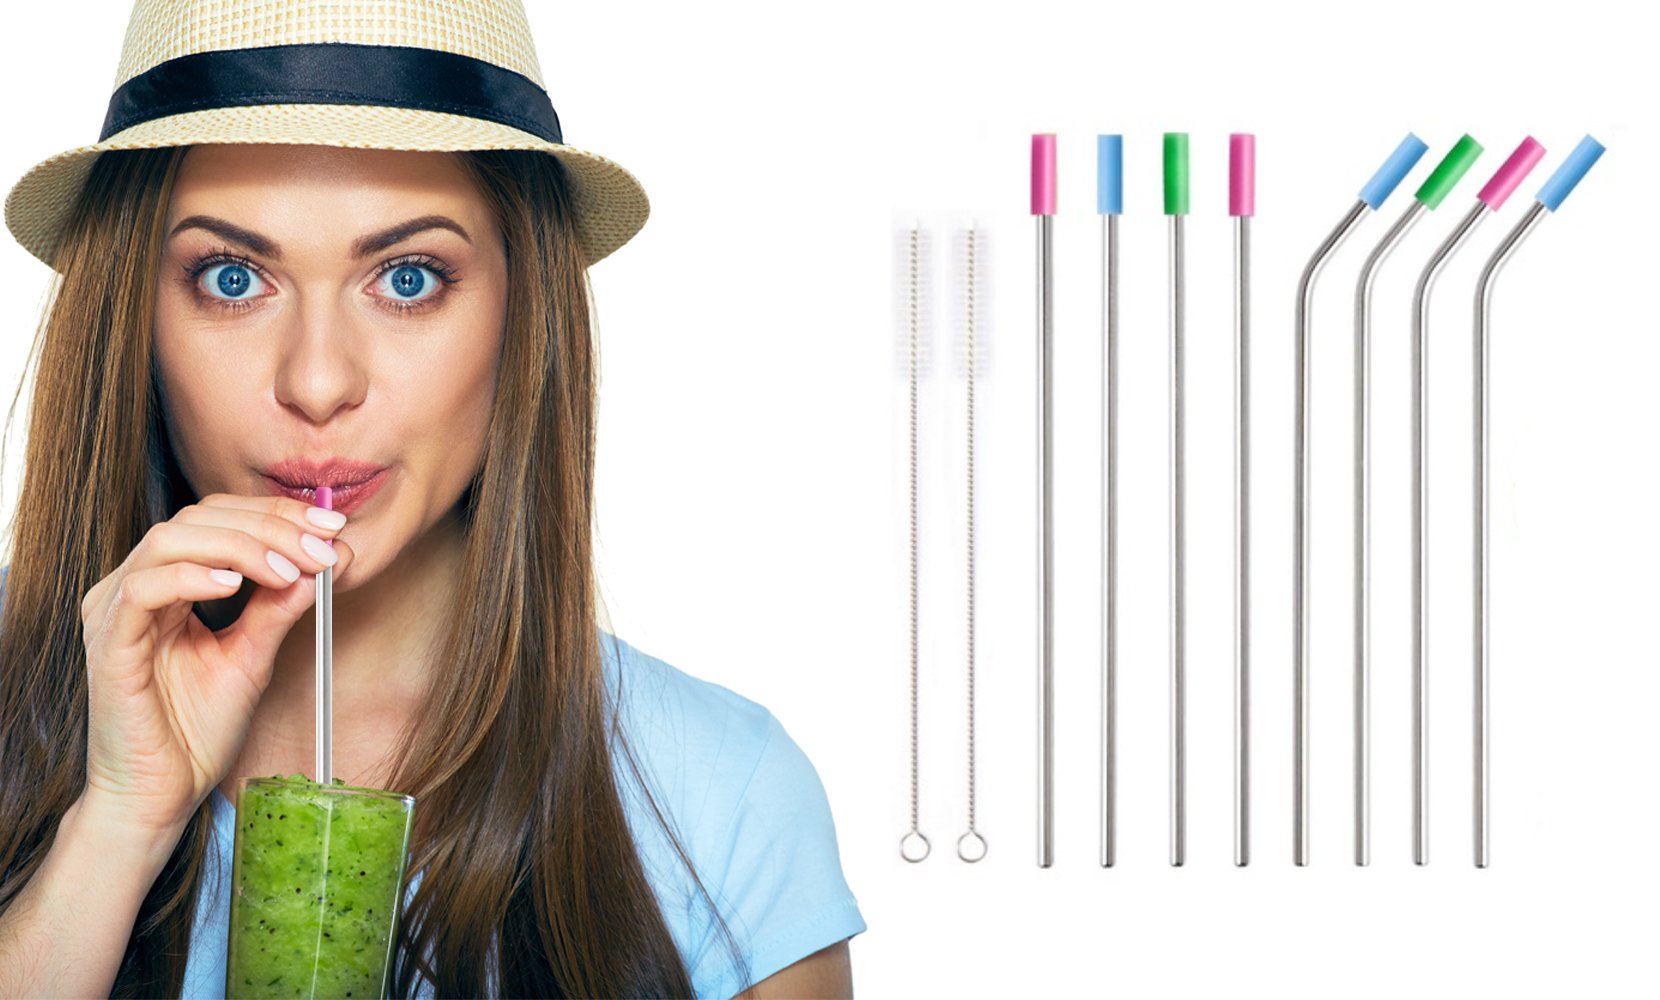 Stainless Steel Extra Wide Drinking Straws with Colored Silicone Tops (10 or 20-Pack)